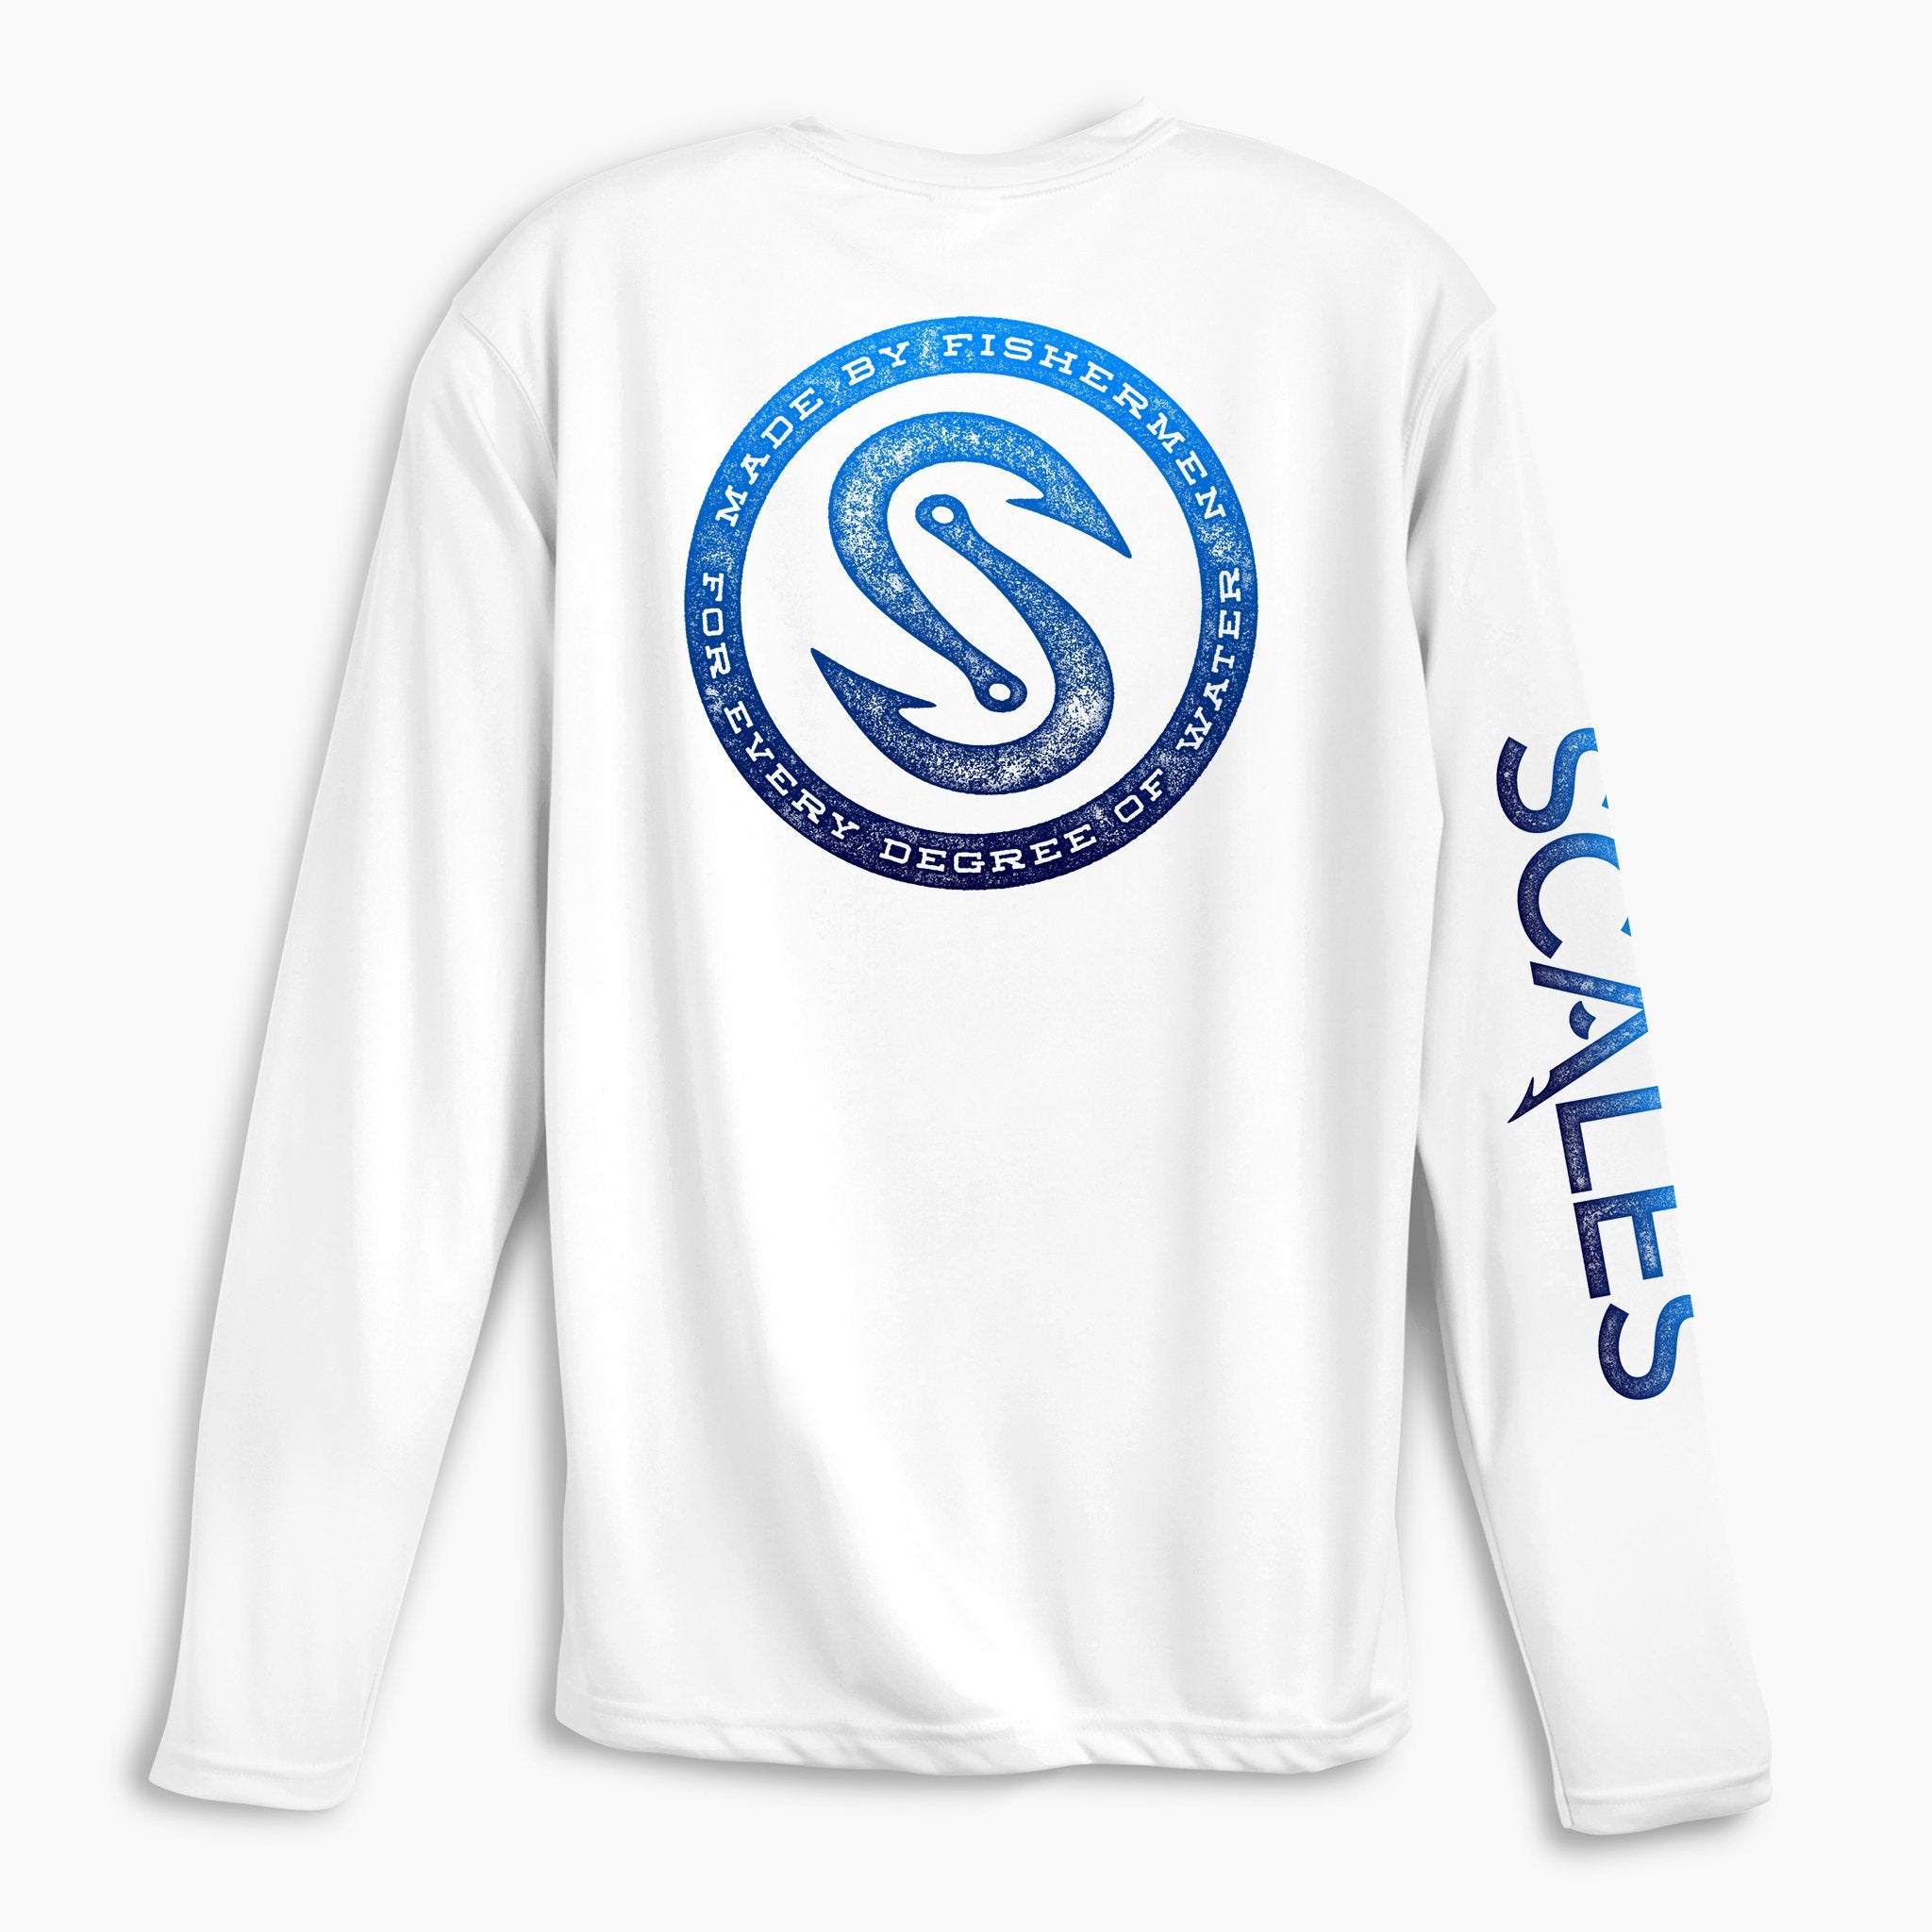 Scales Gear Pro Performance Every Degree Crew White Shirt